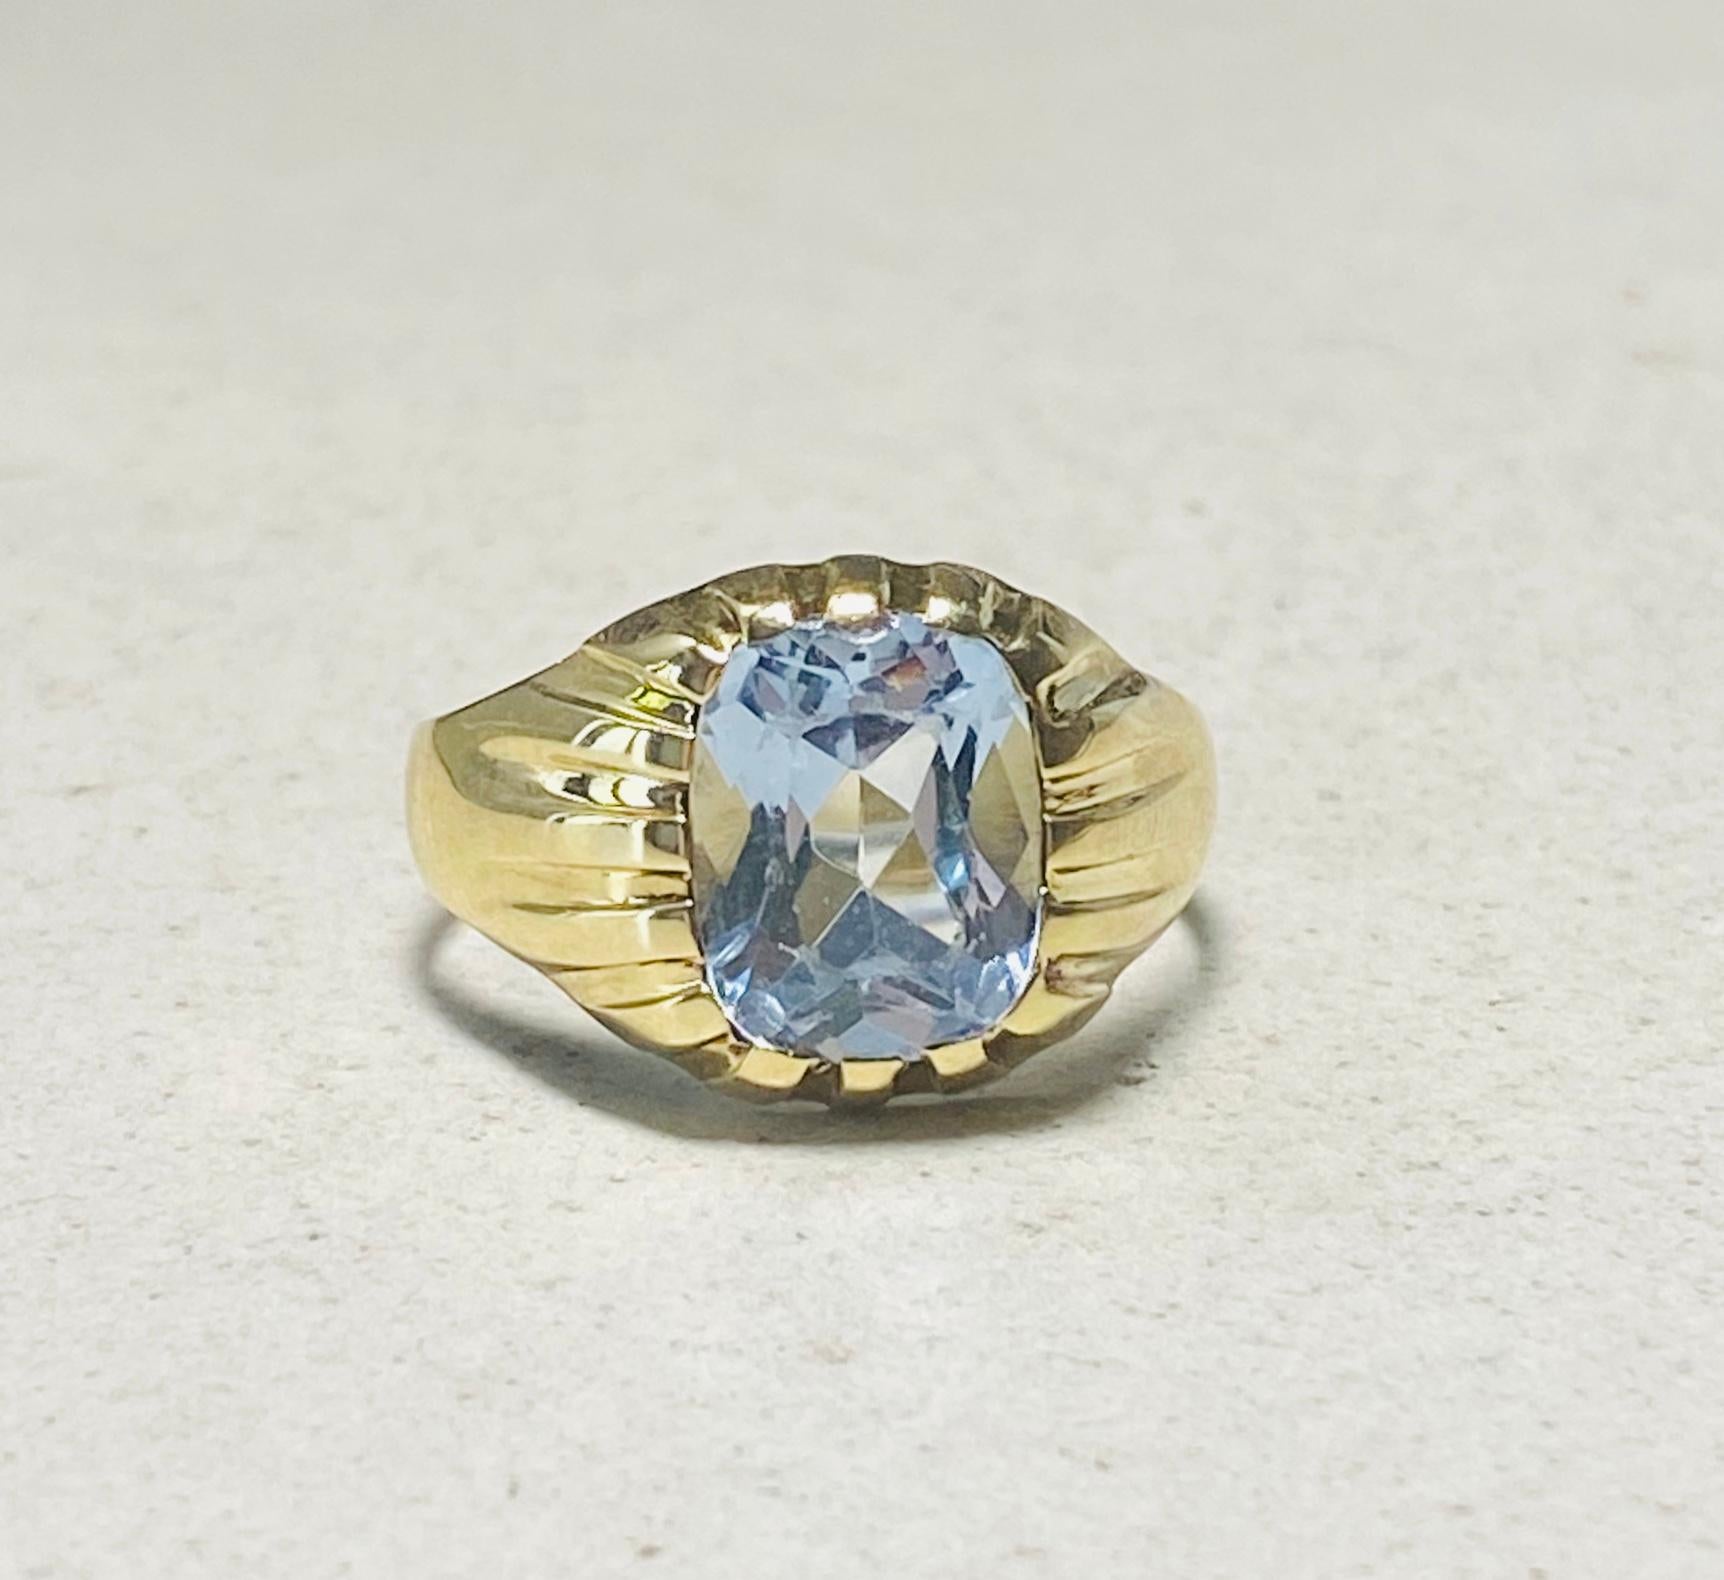 Yellow Golden Ring with Aquamarine from the 1950S. You don't see a pre-loved ring like this very often. The shape of the setting is stylish and really something else. The aquamarine is nicely cushion faceted and set in 8 carat yellow gold. Fully